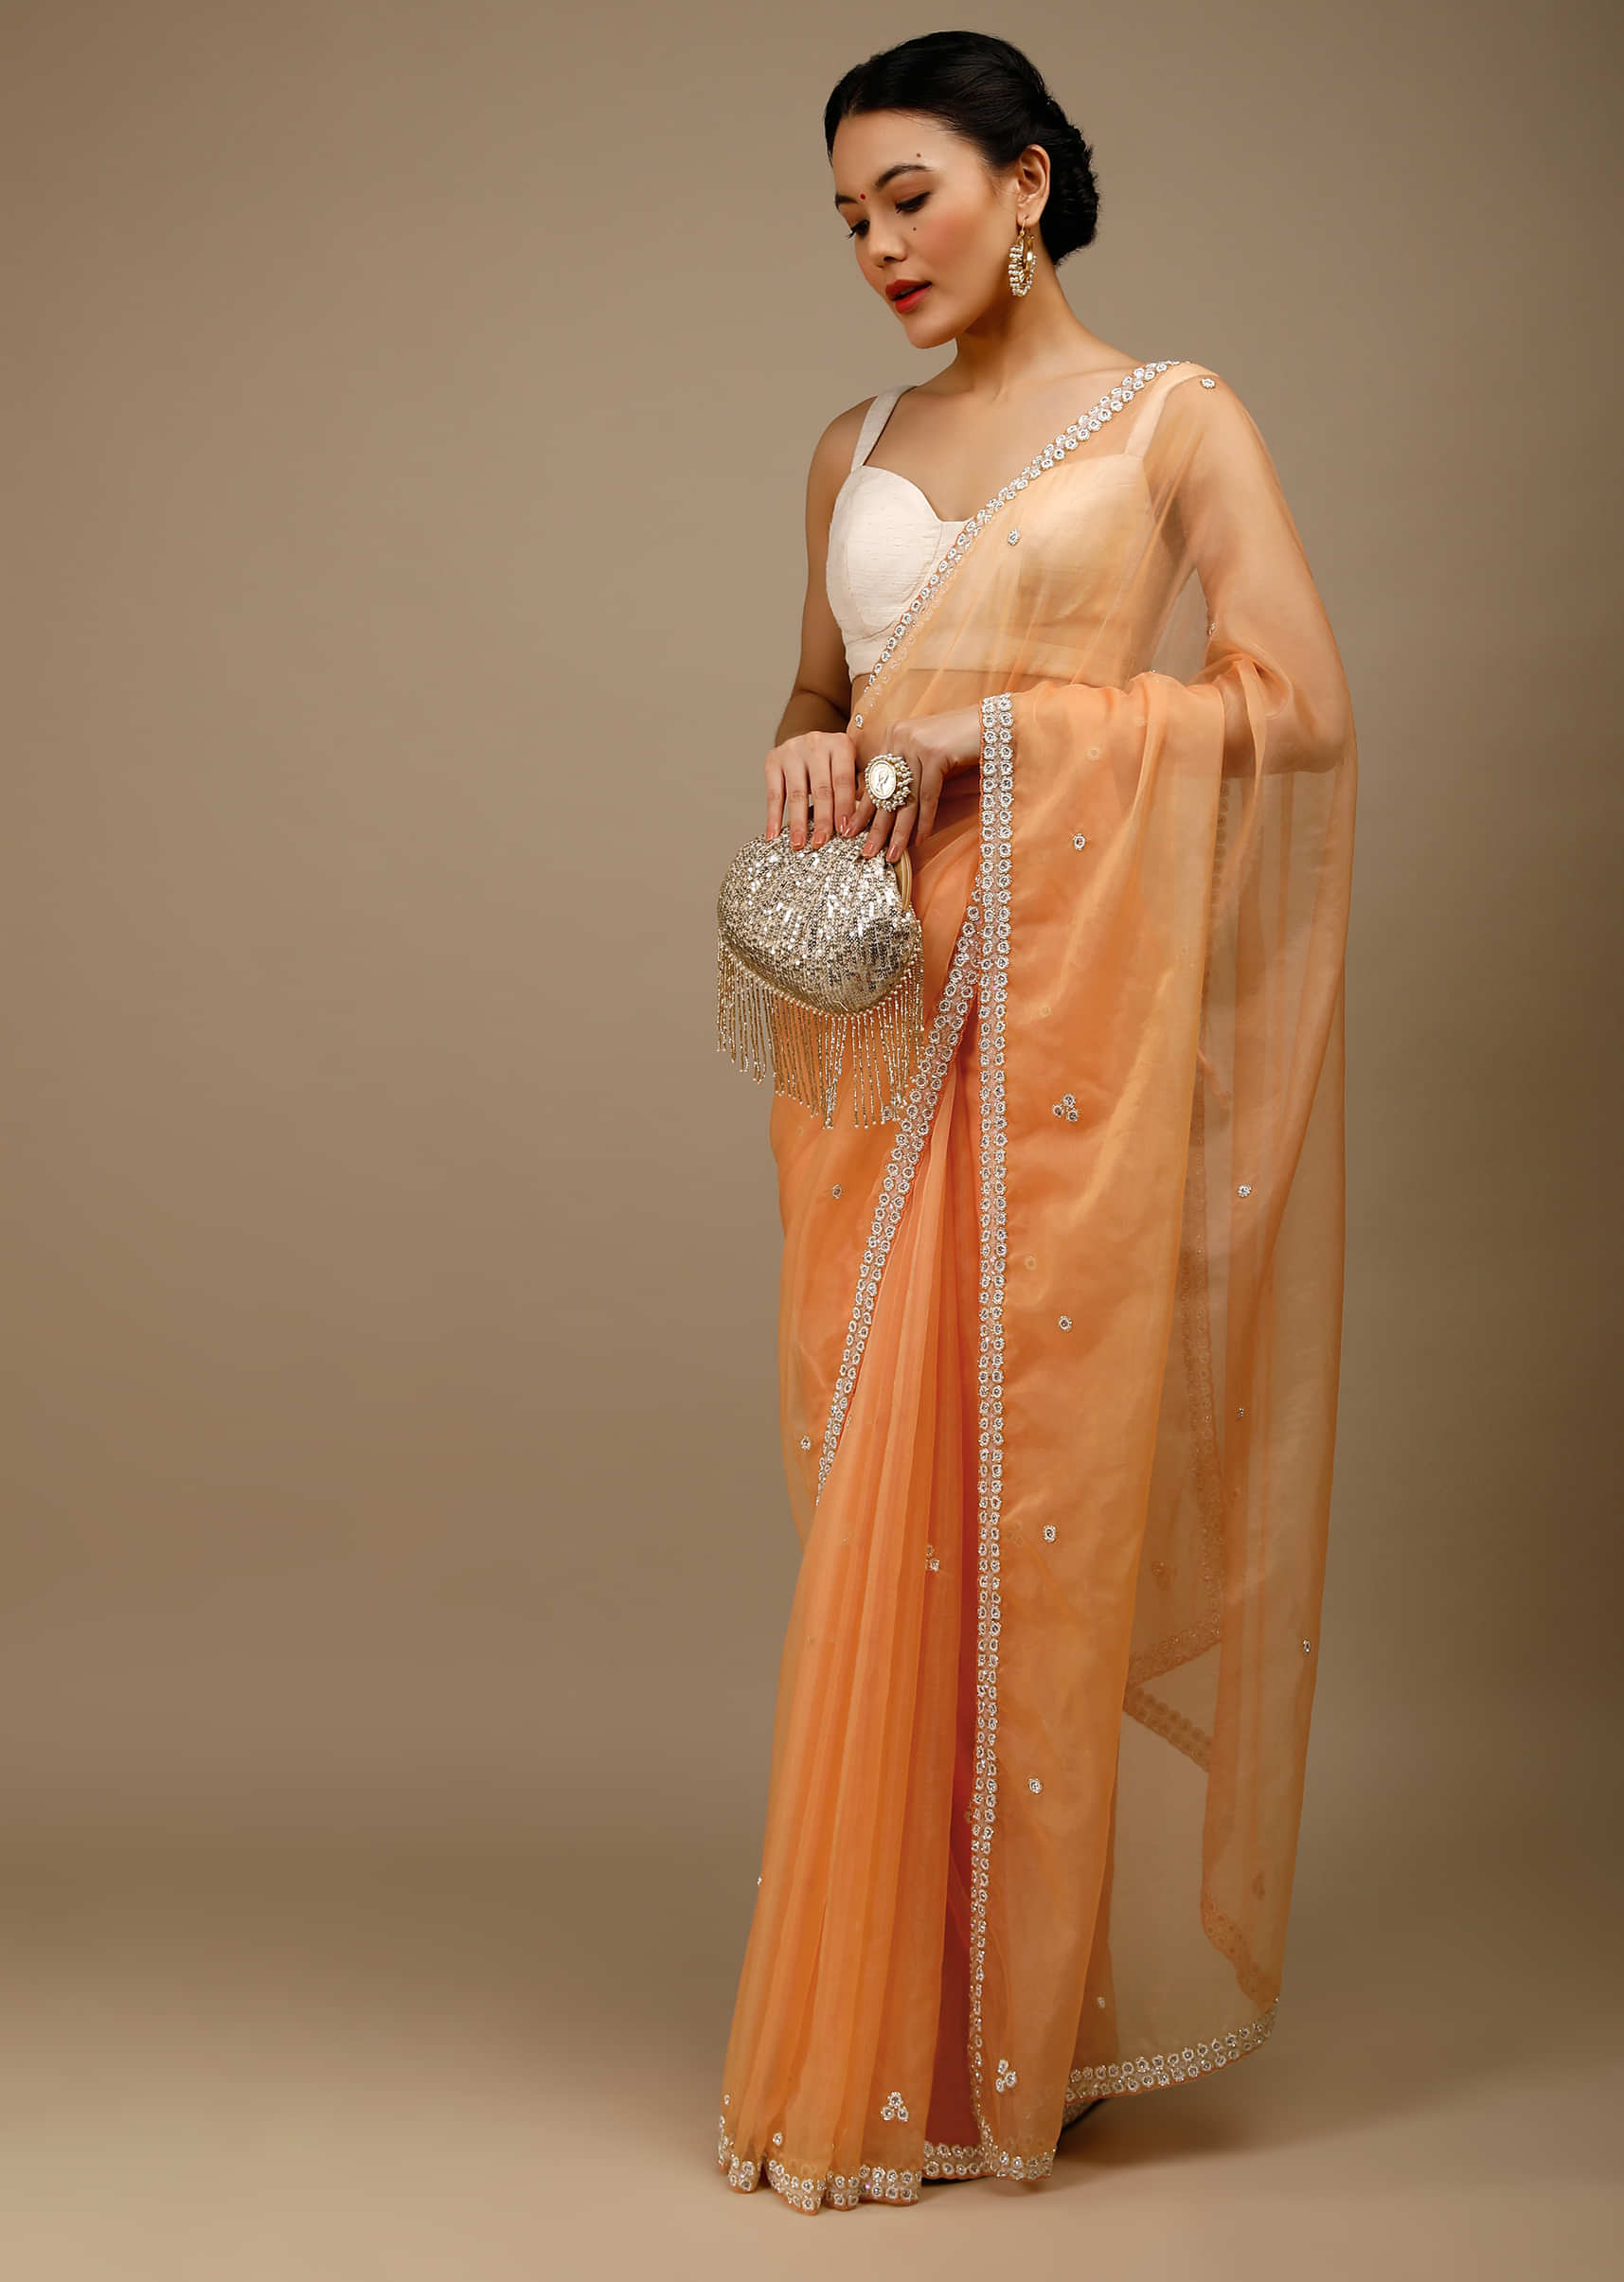 Pumpkin Orange Saree In Organza With Moti Beads And Stone Embroidered Round Motifs On The Border And Butti Design  